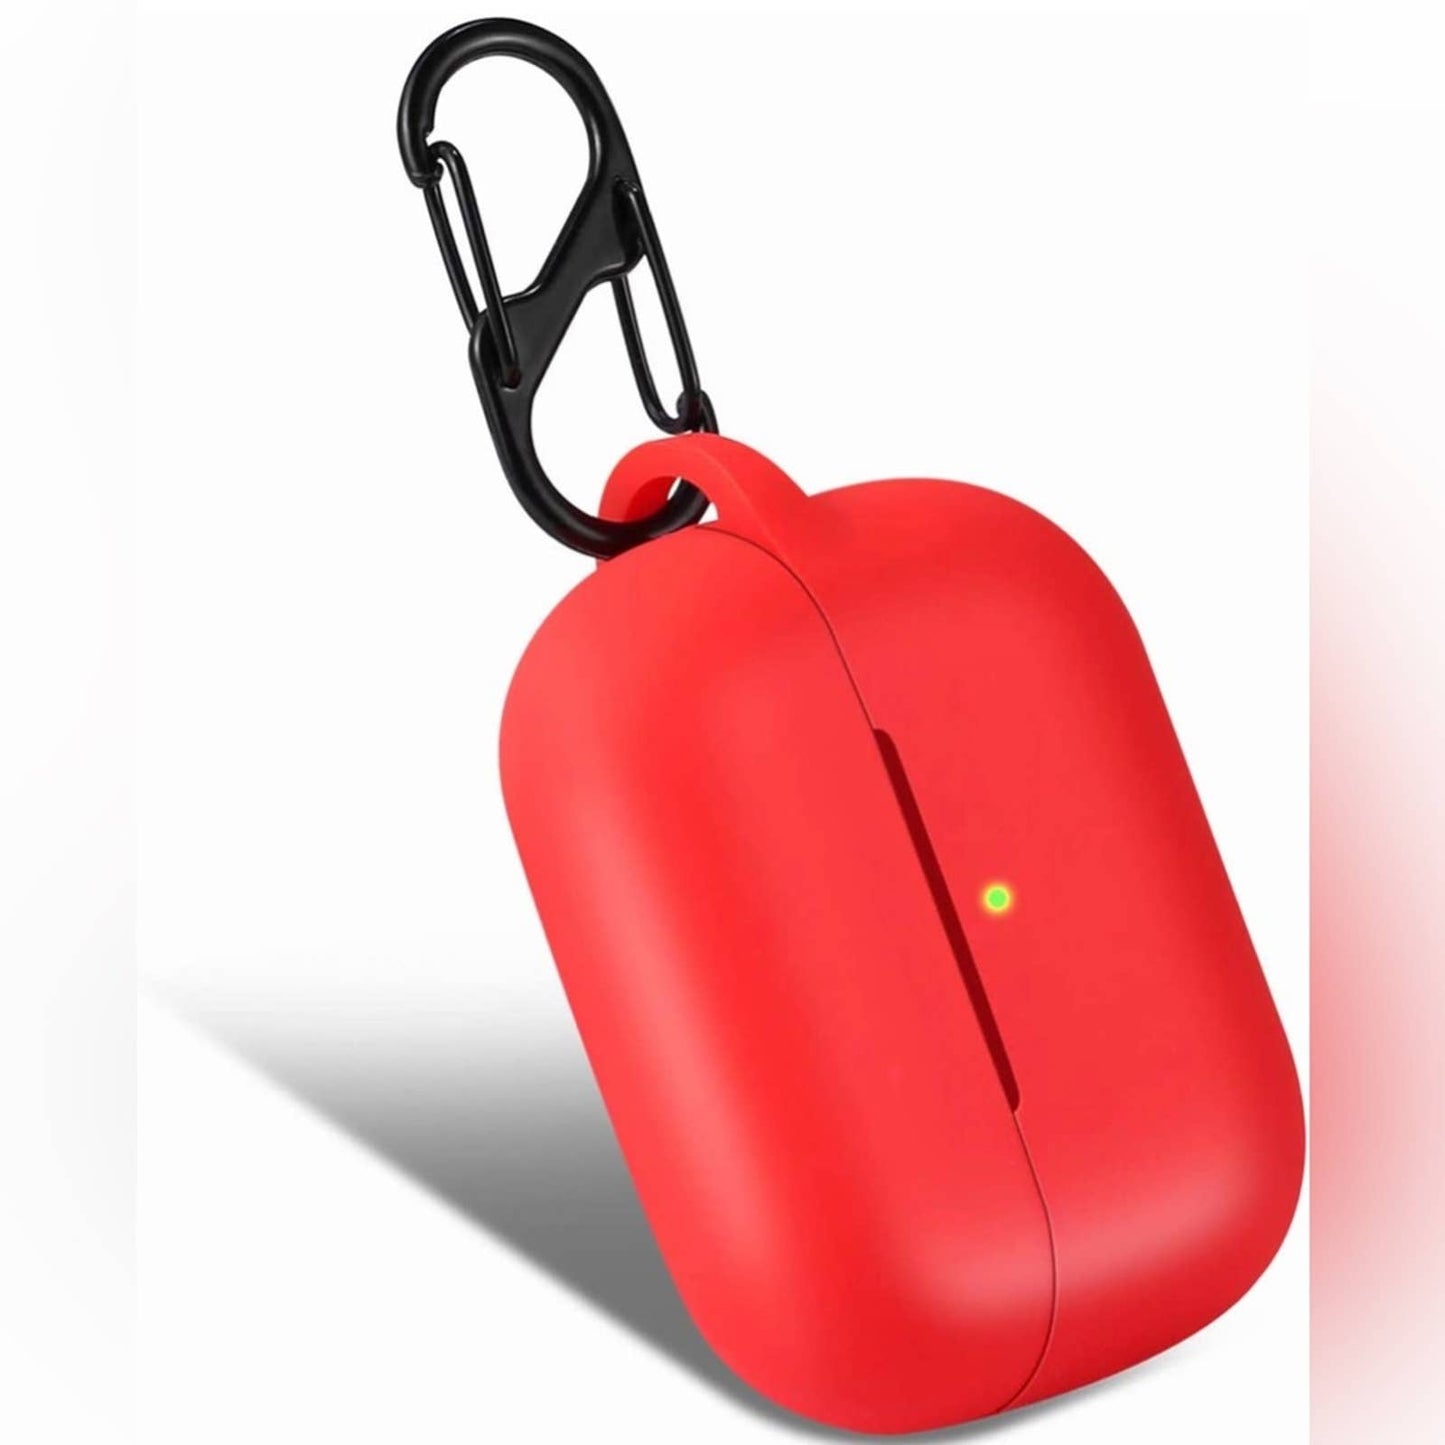 LiZHi for Airpods Pro 2nd Generation Case Cover, Soft Silicone Skin Cover Red